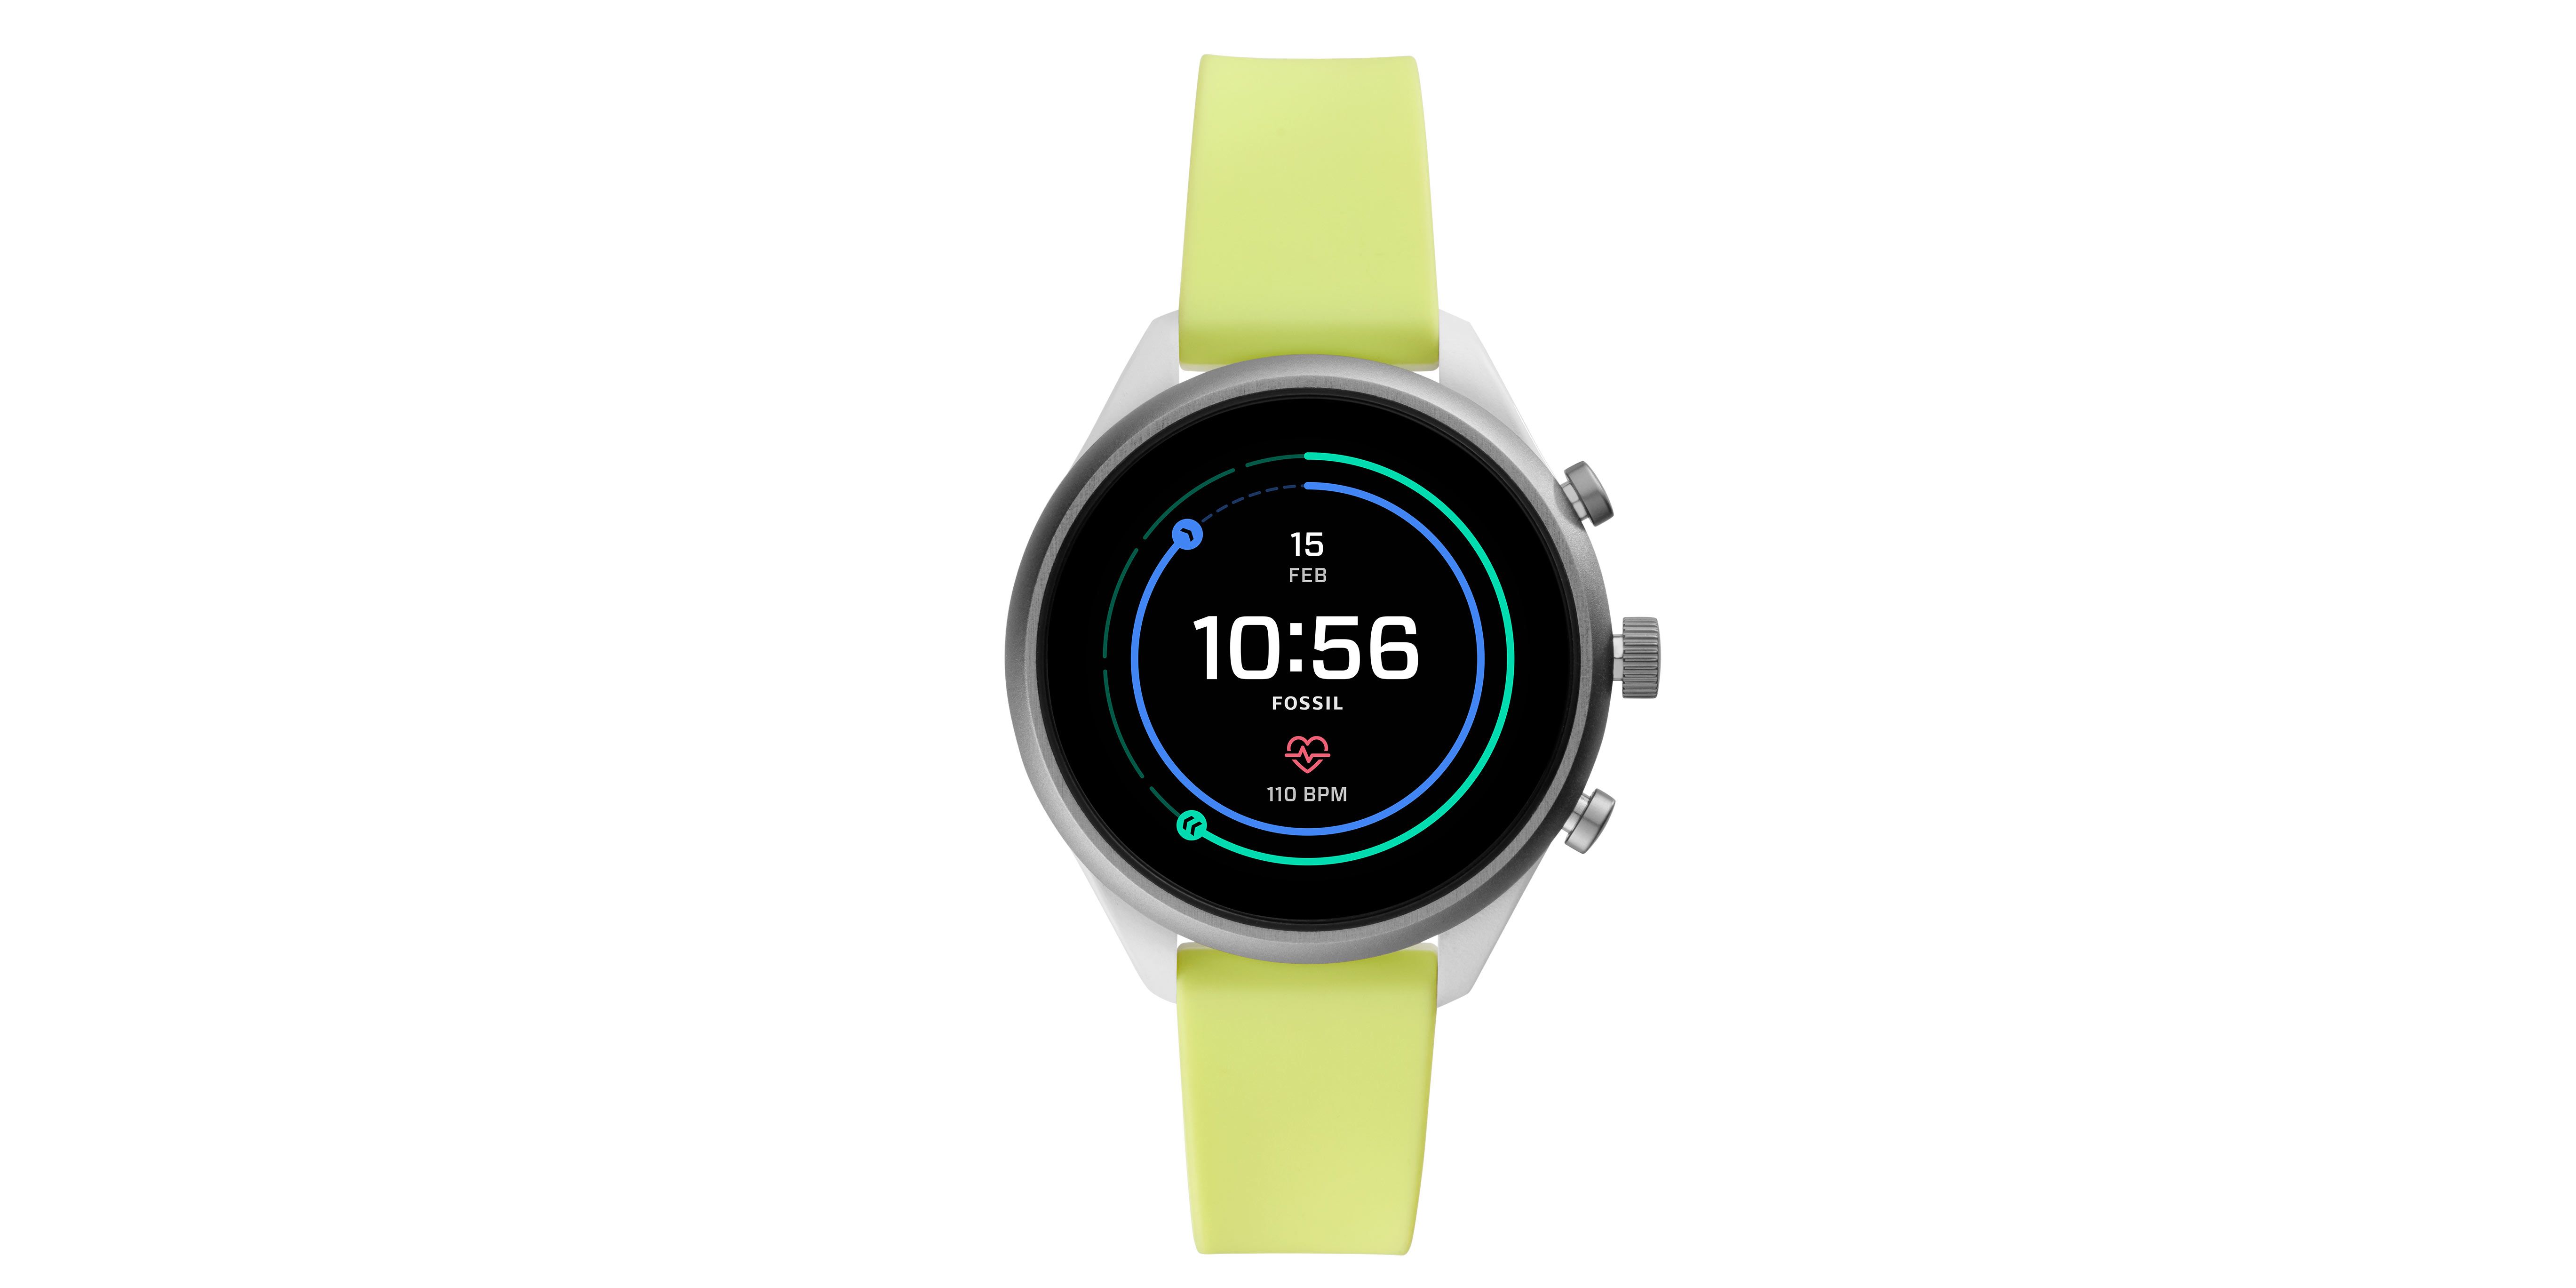 Approved: Fossil Sport Touchscreen Smartwatch